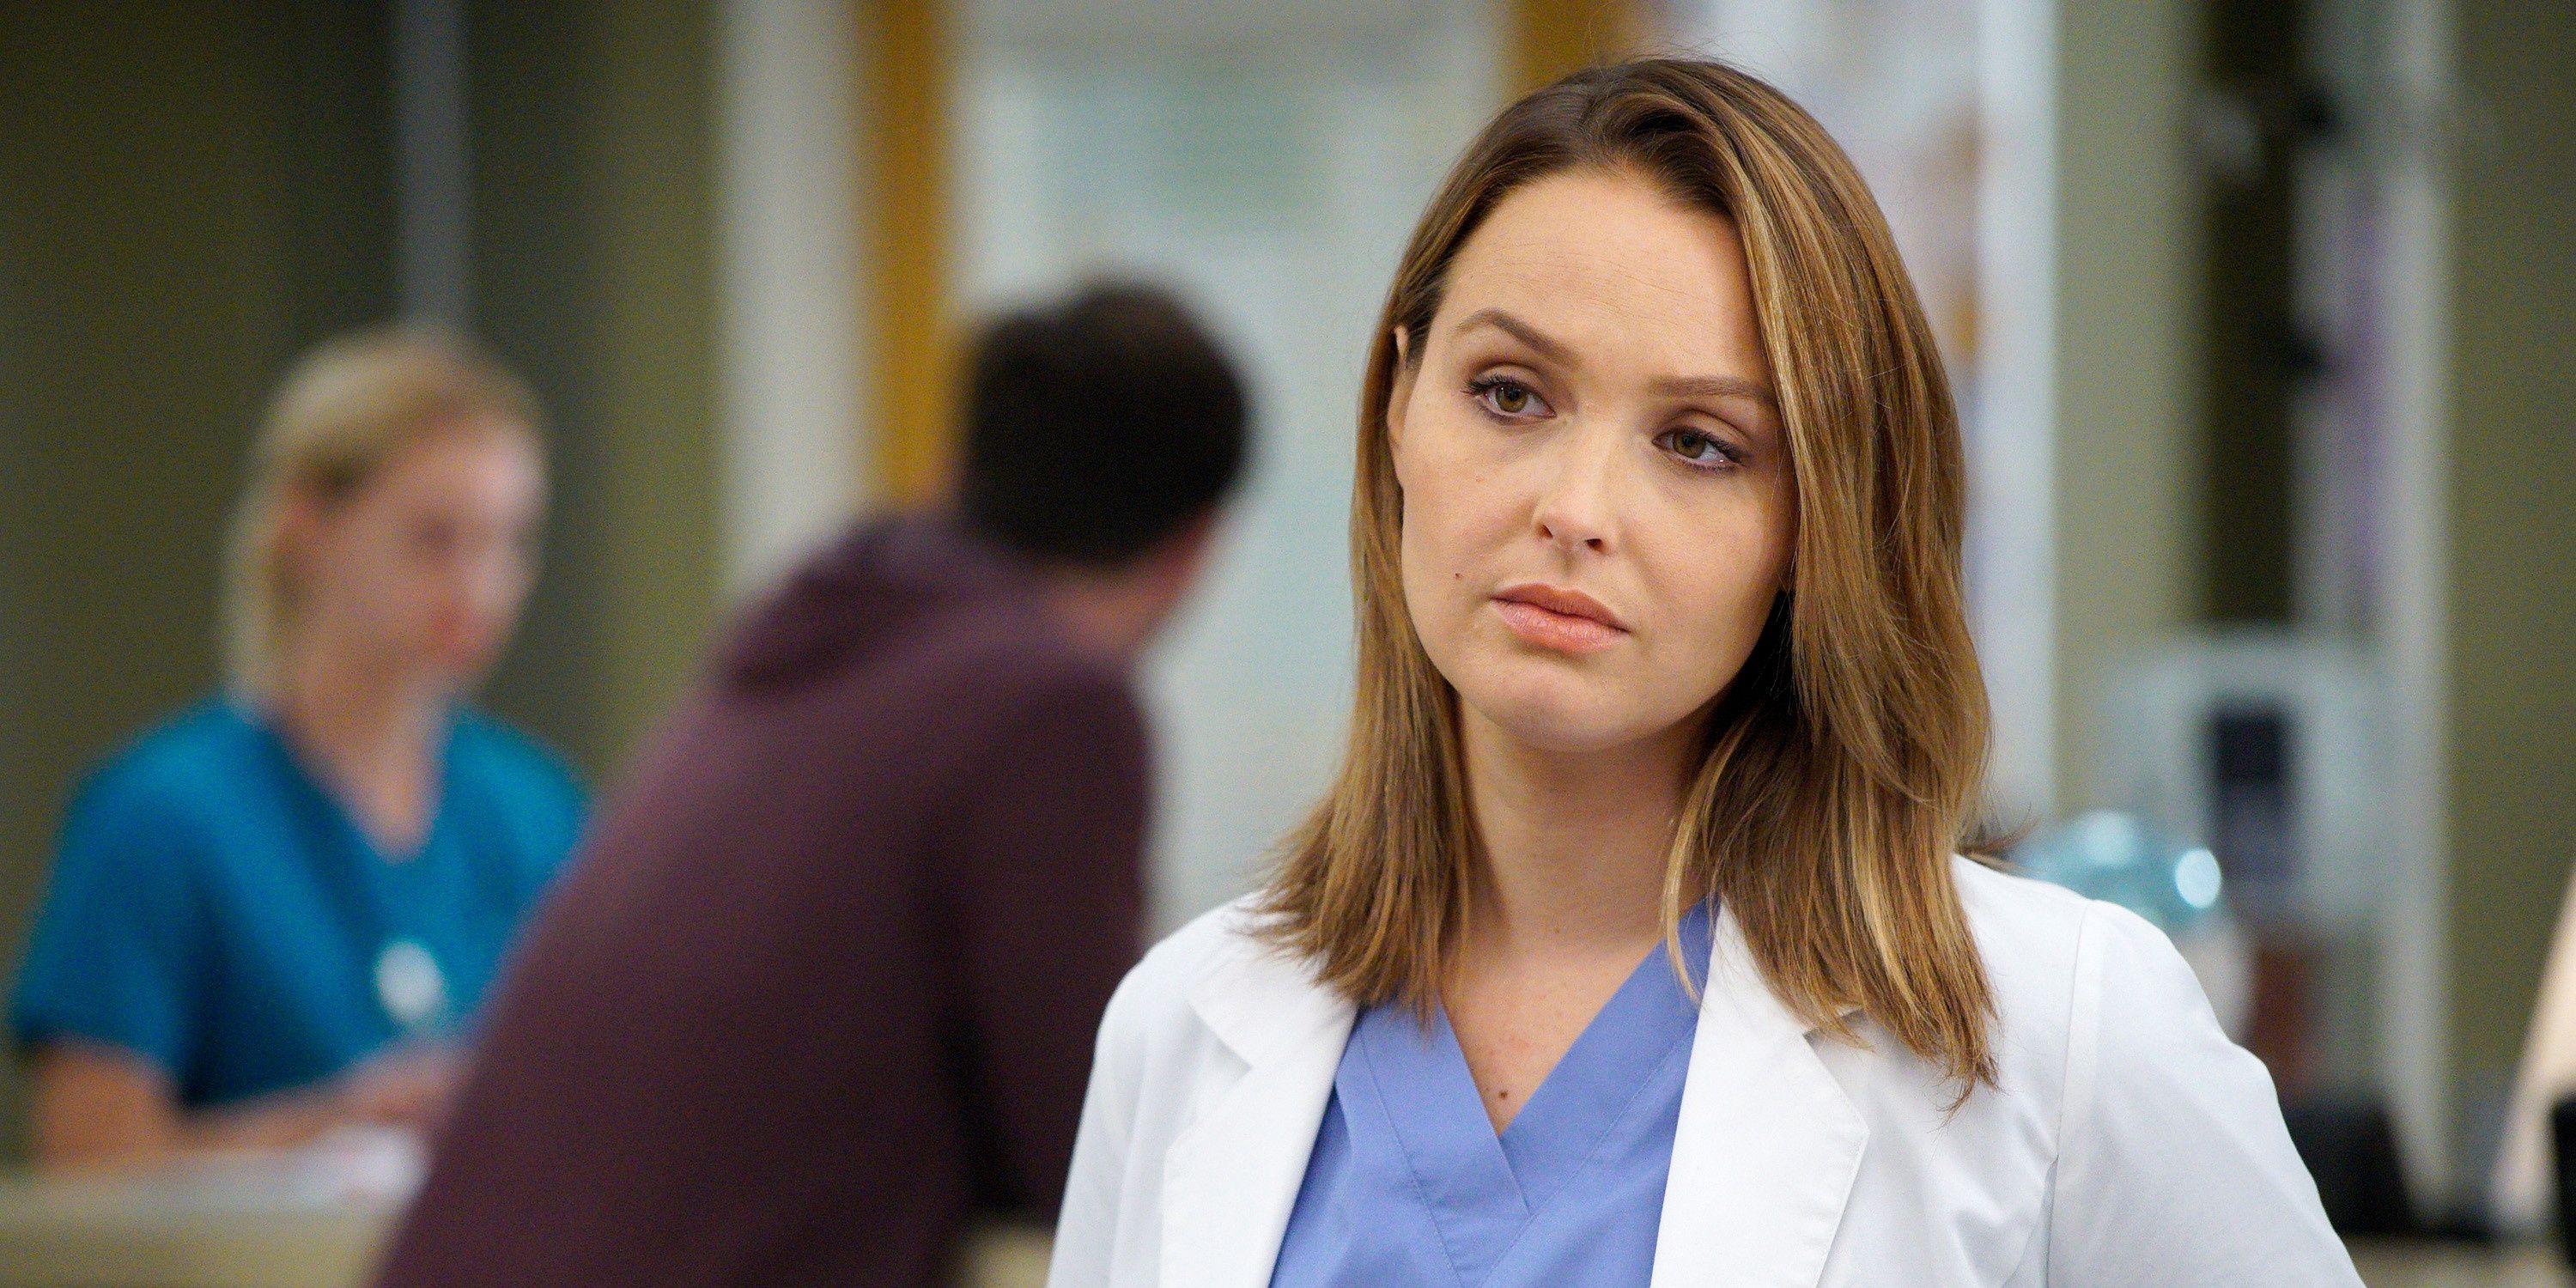 Jo in her scrubs and coat looking thoughtful